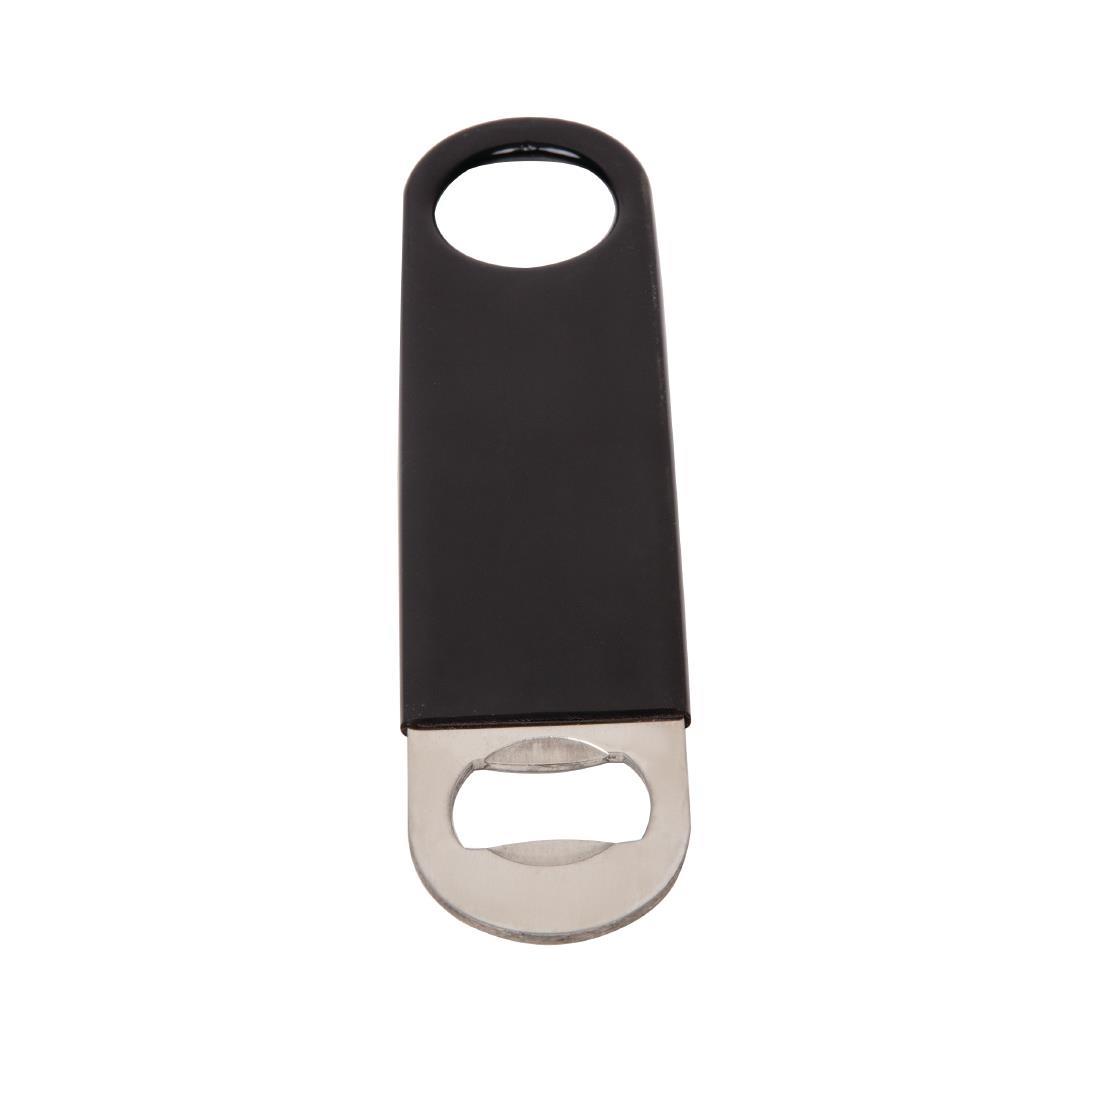 Olympia Bar Blade Bottle Opener with PVC Grip - CD273  - 3